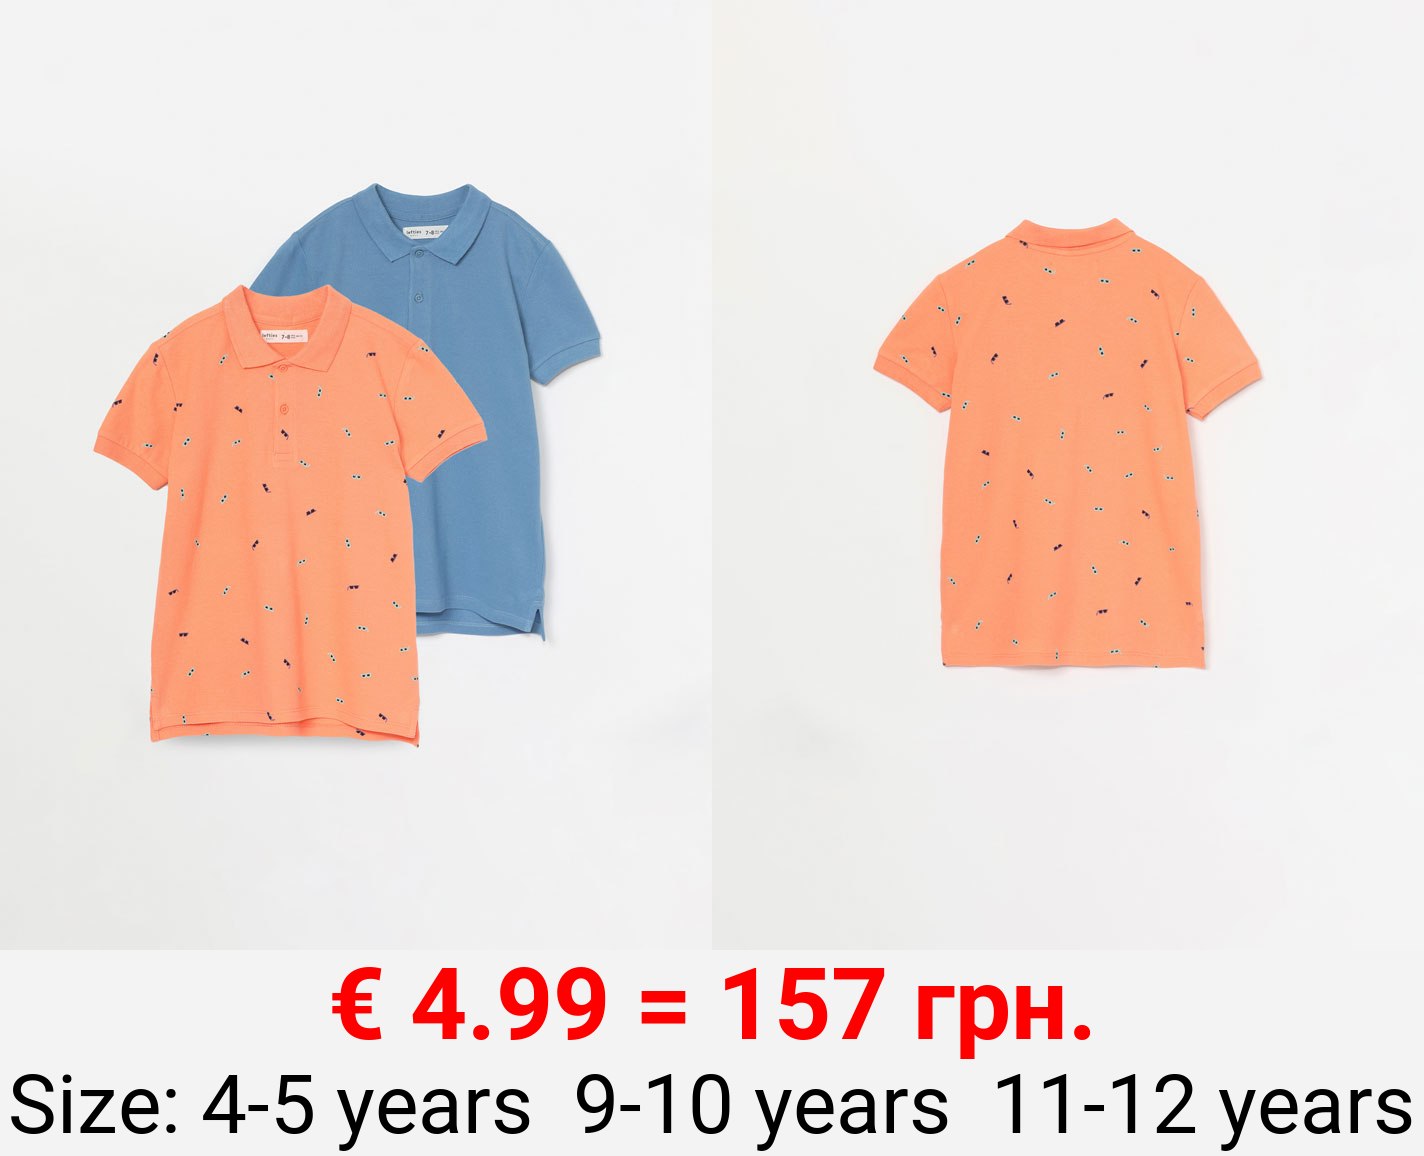 Pack of 2 plain and printed polos.